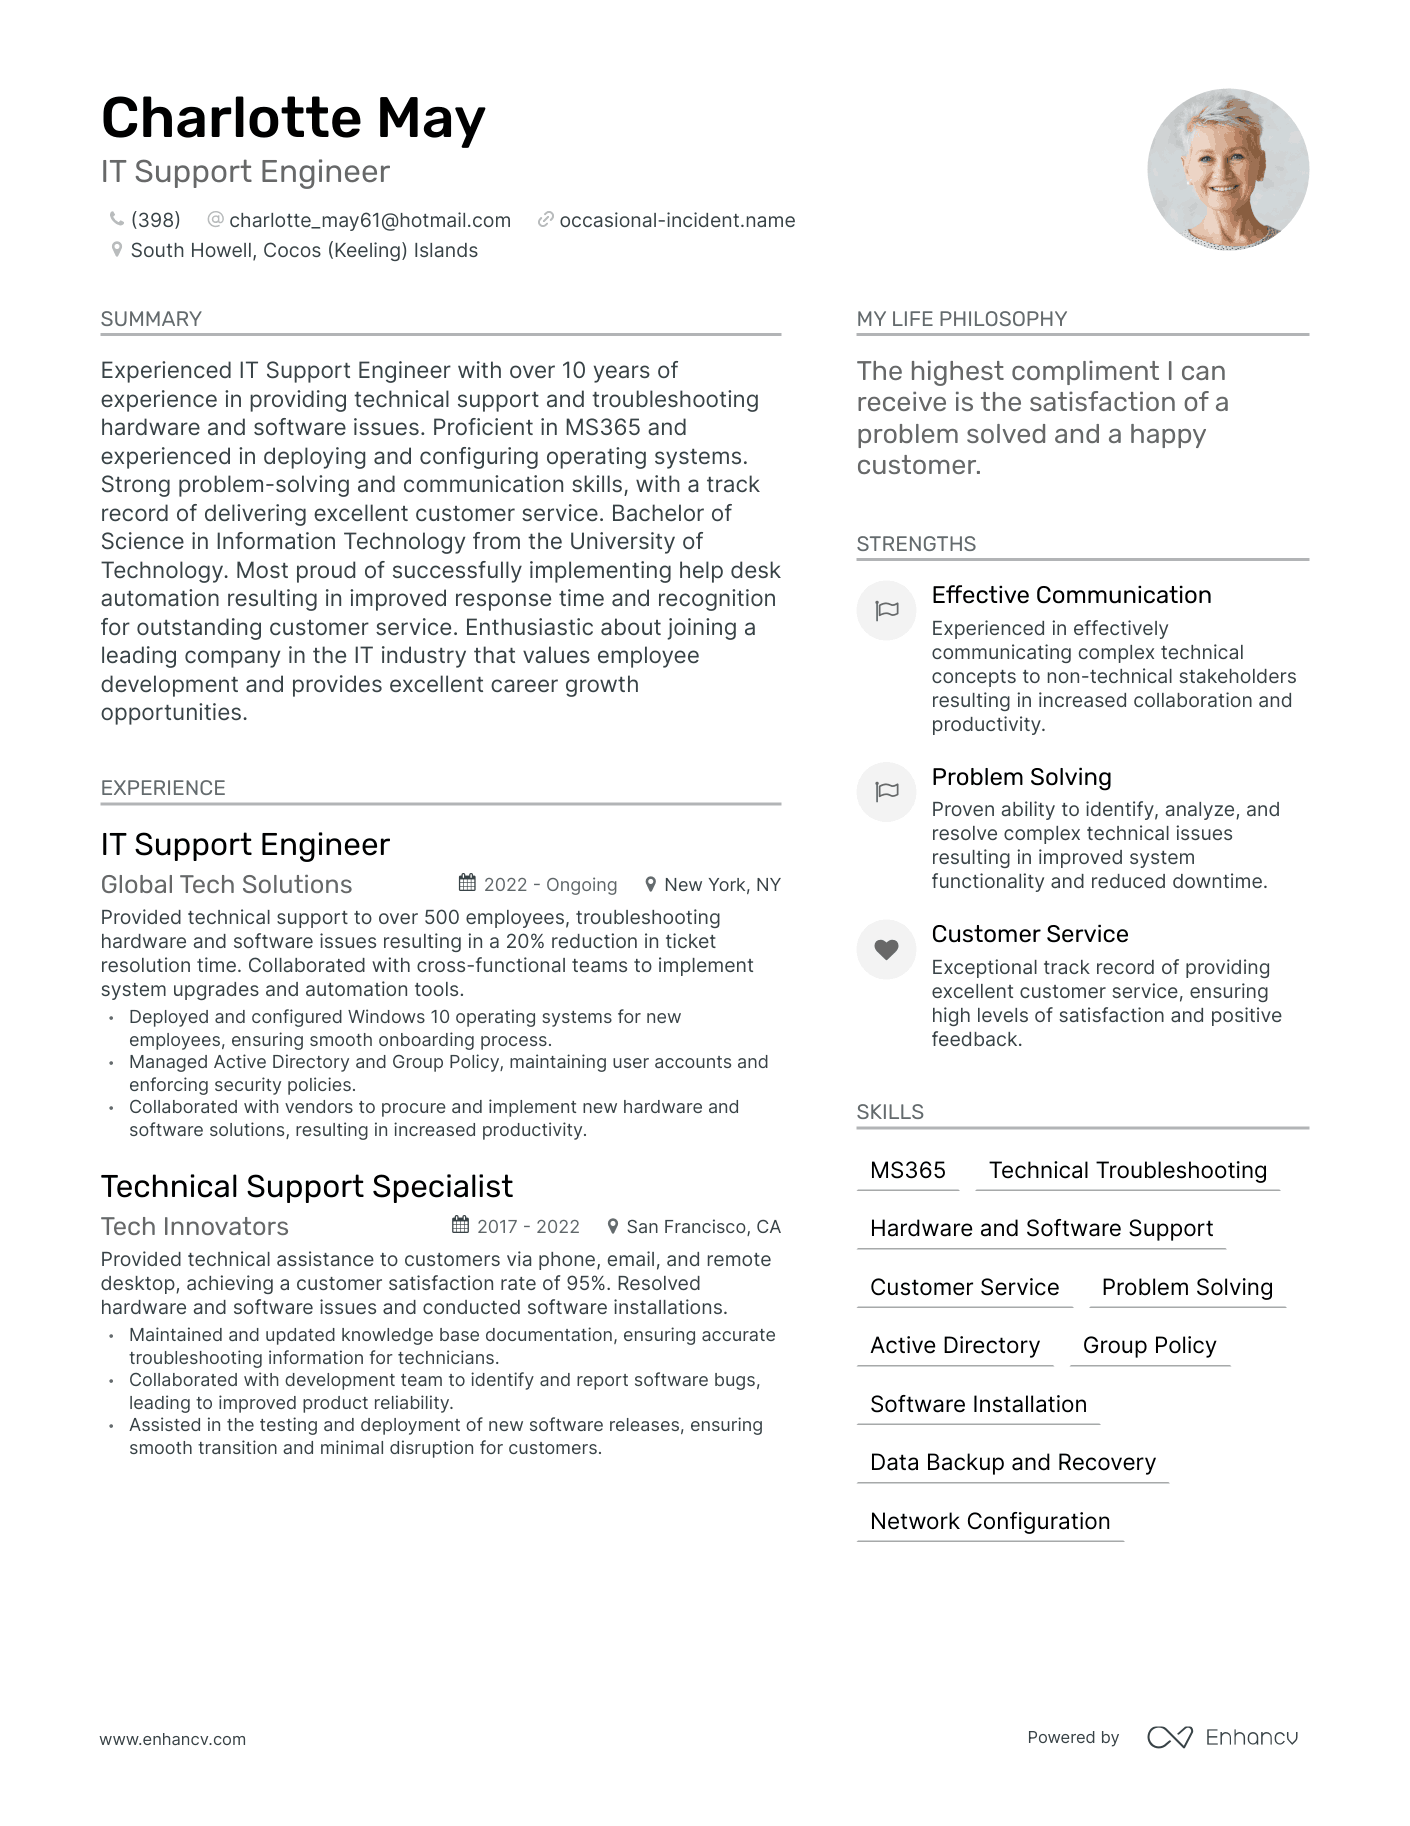 IT Support Engineer resume example